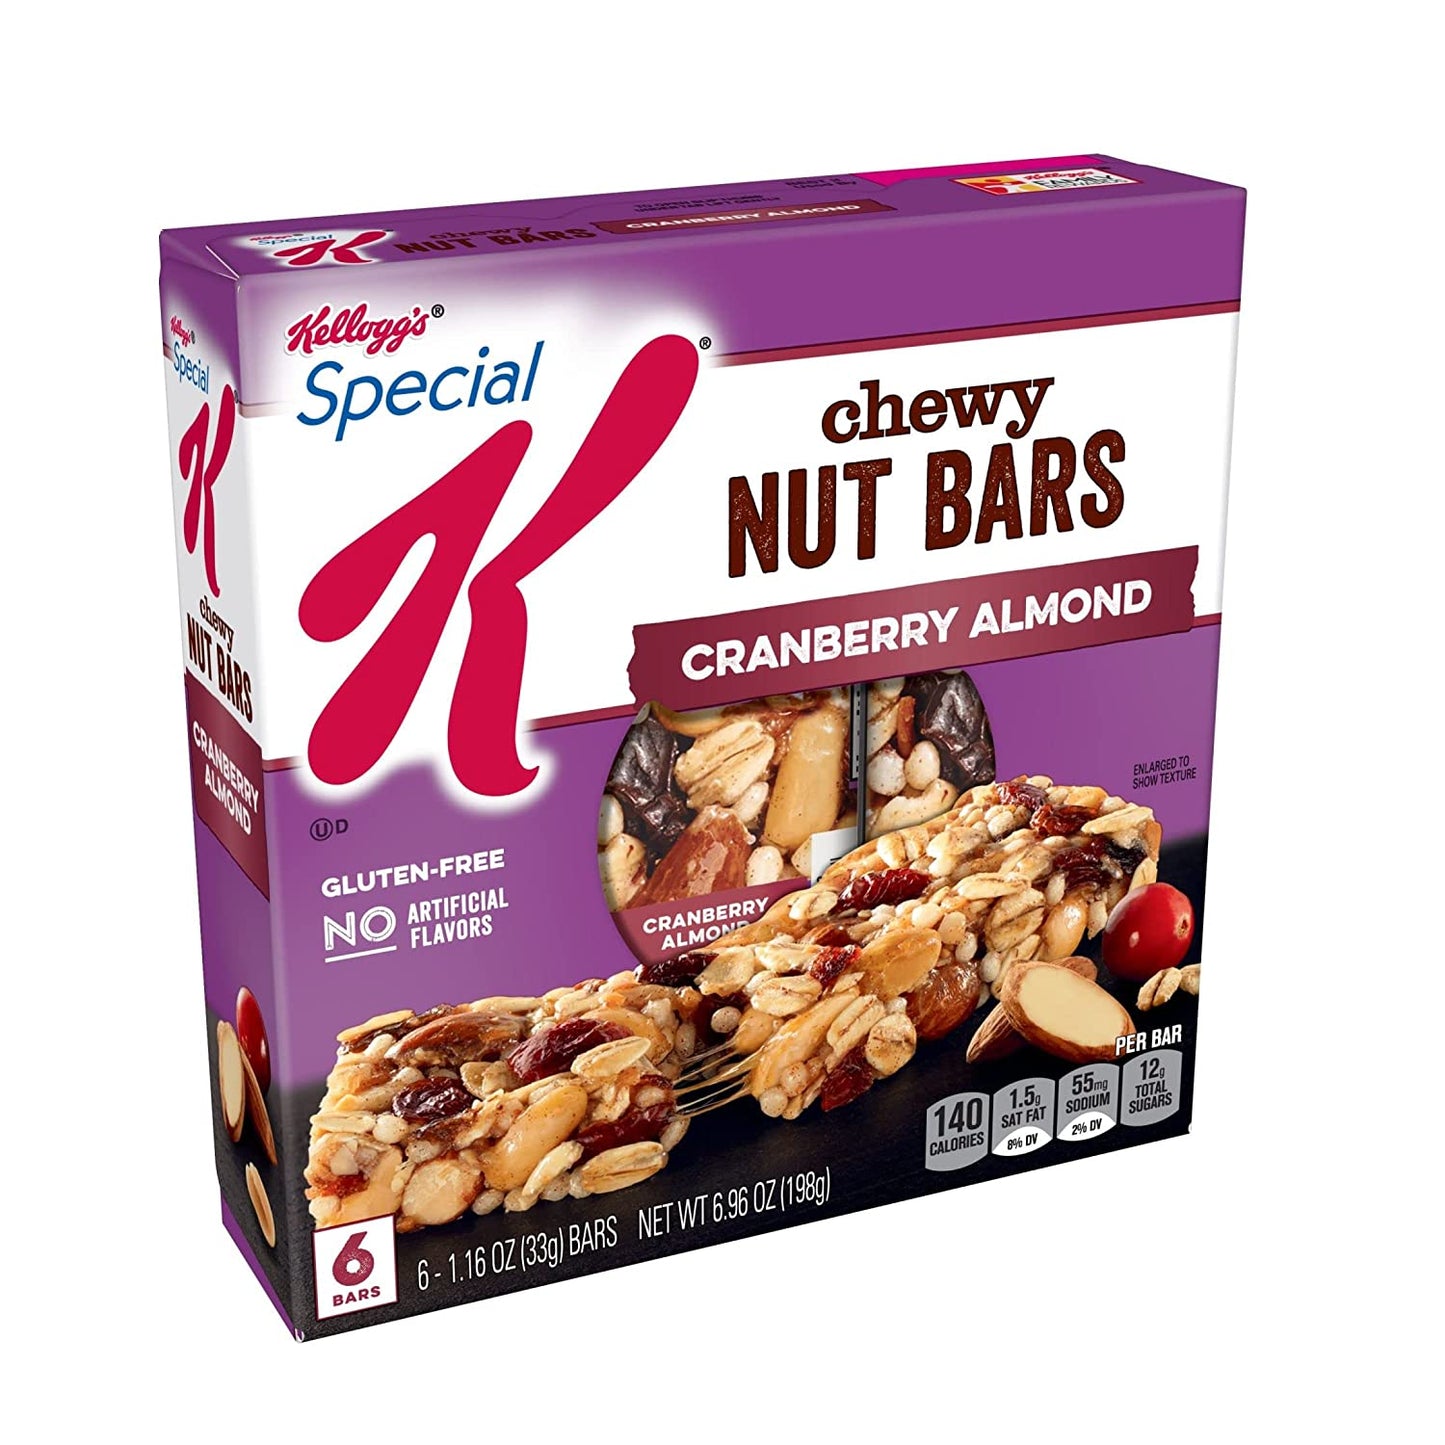 Kellogg's Special K Chewy Breakfast Bars, Gluten-Free Snacks, 140 Calories Per Bar, Cranberry Almond (8 Boxes, 48 Bars)